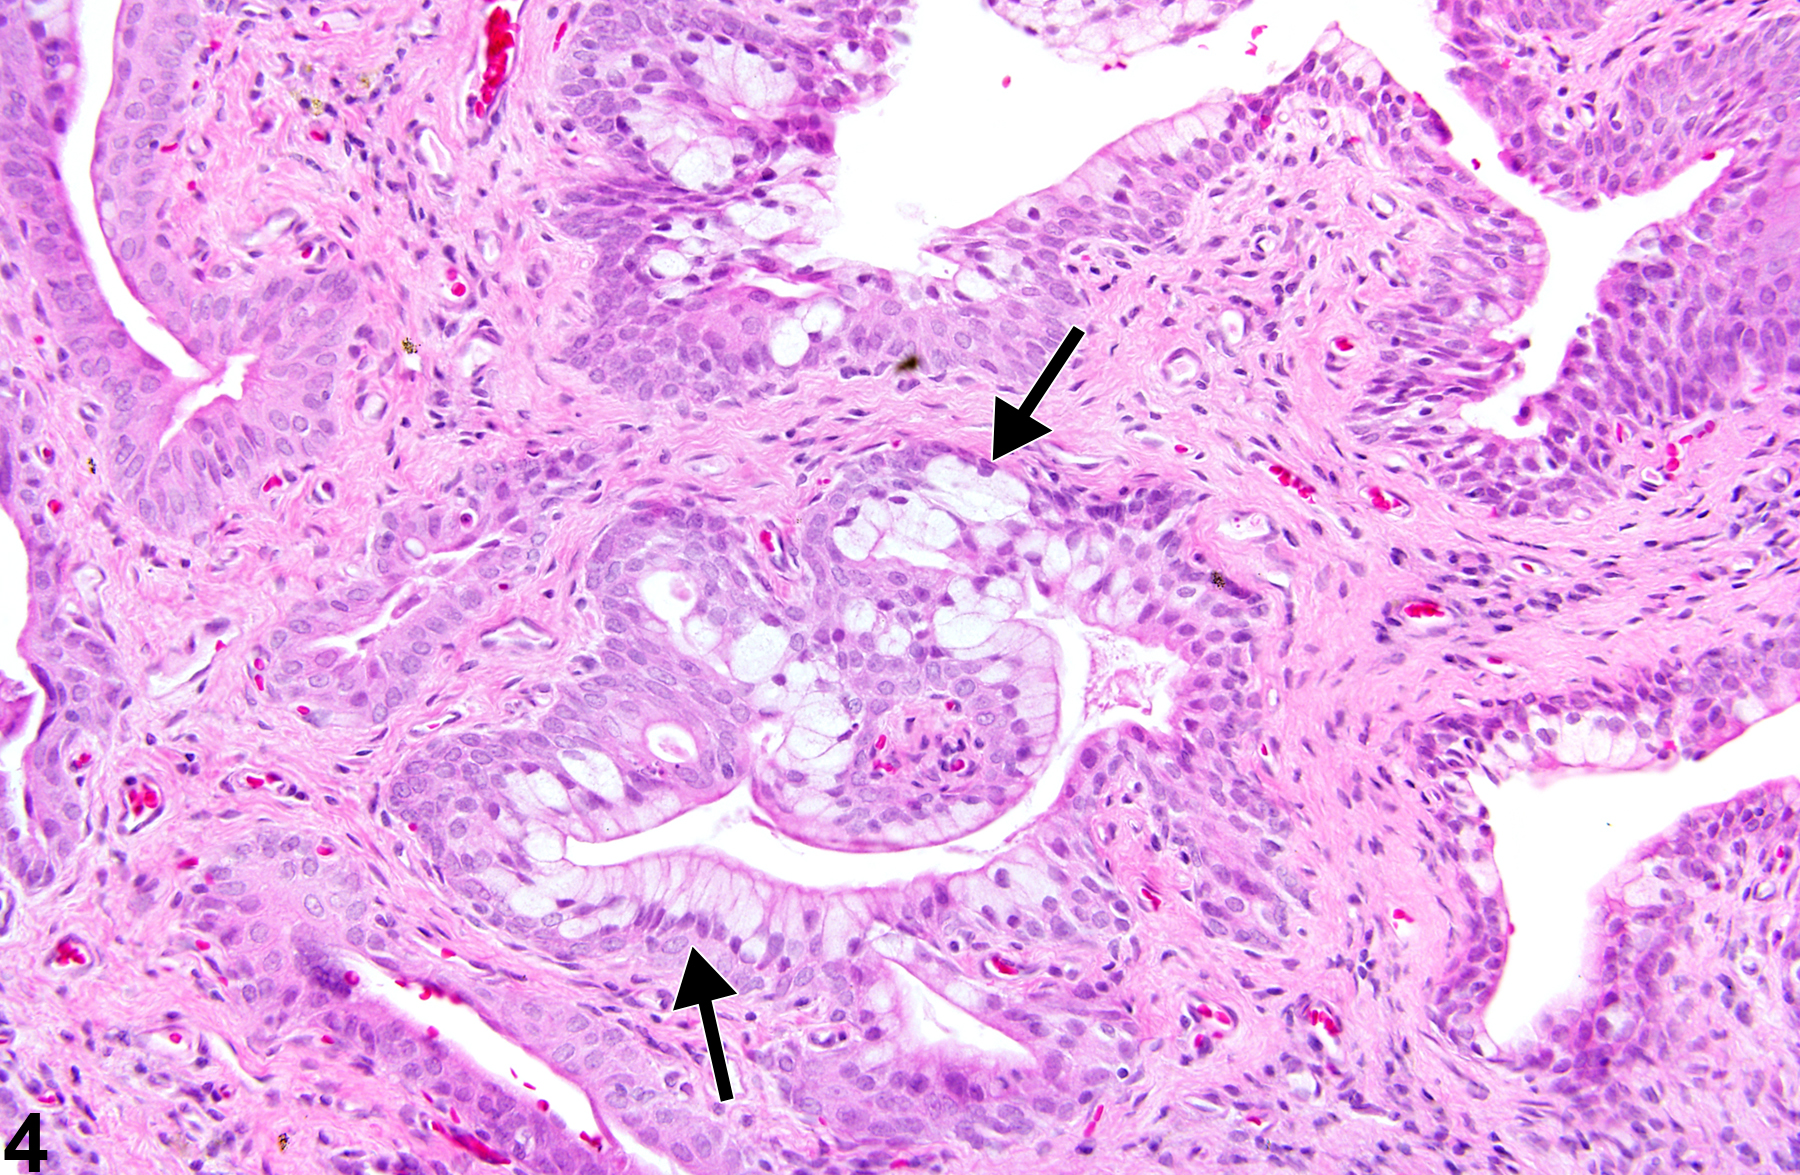 Image of metaplasia in the urinary bladder from a female F344/N rat in a chronic study